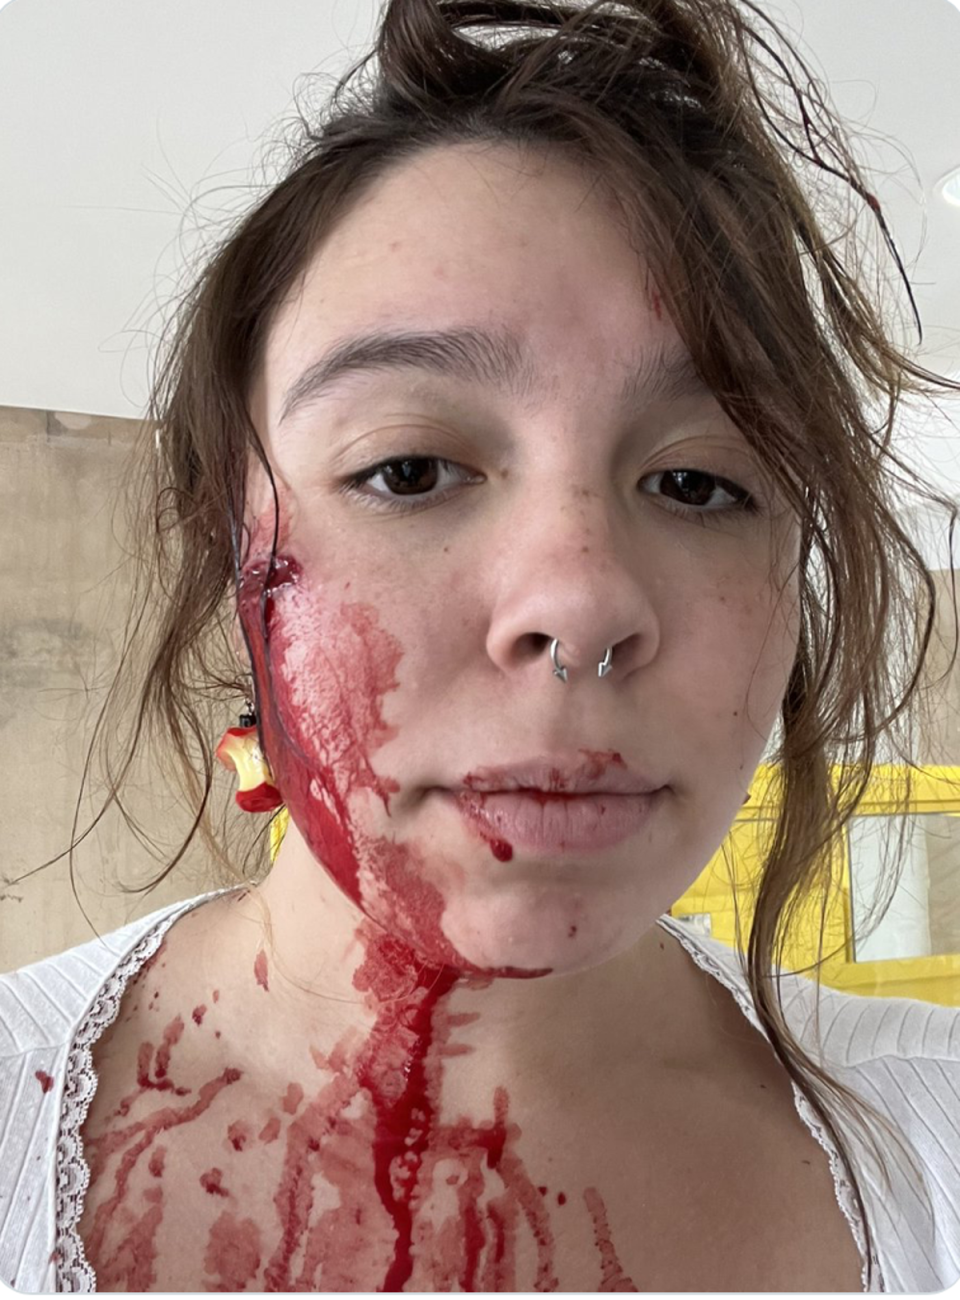 A young woman known as Lilli shared photographs of her injuries sustained in the Highland Park mass shooting (Twitter)